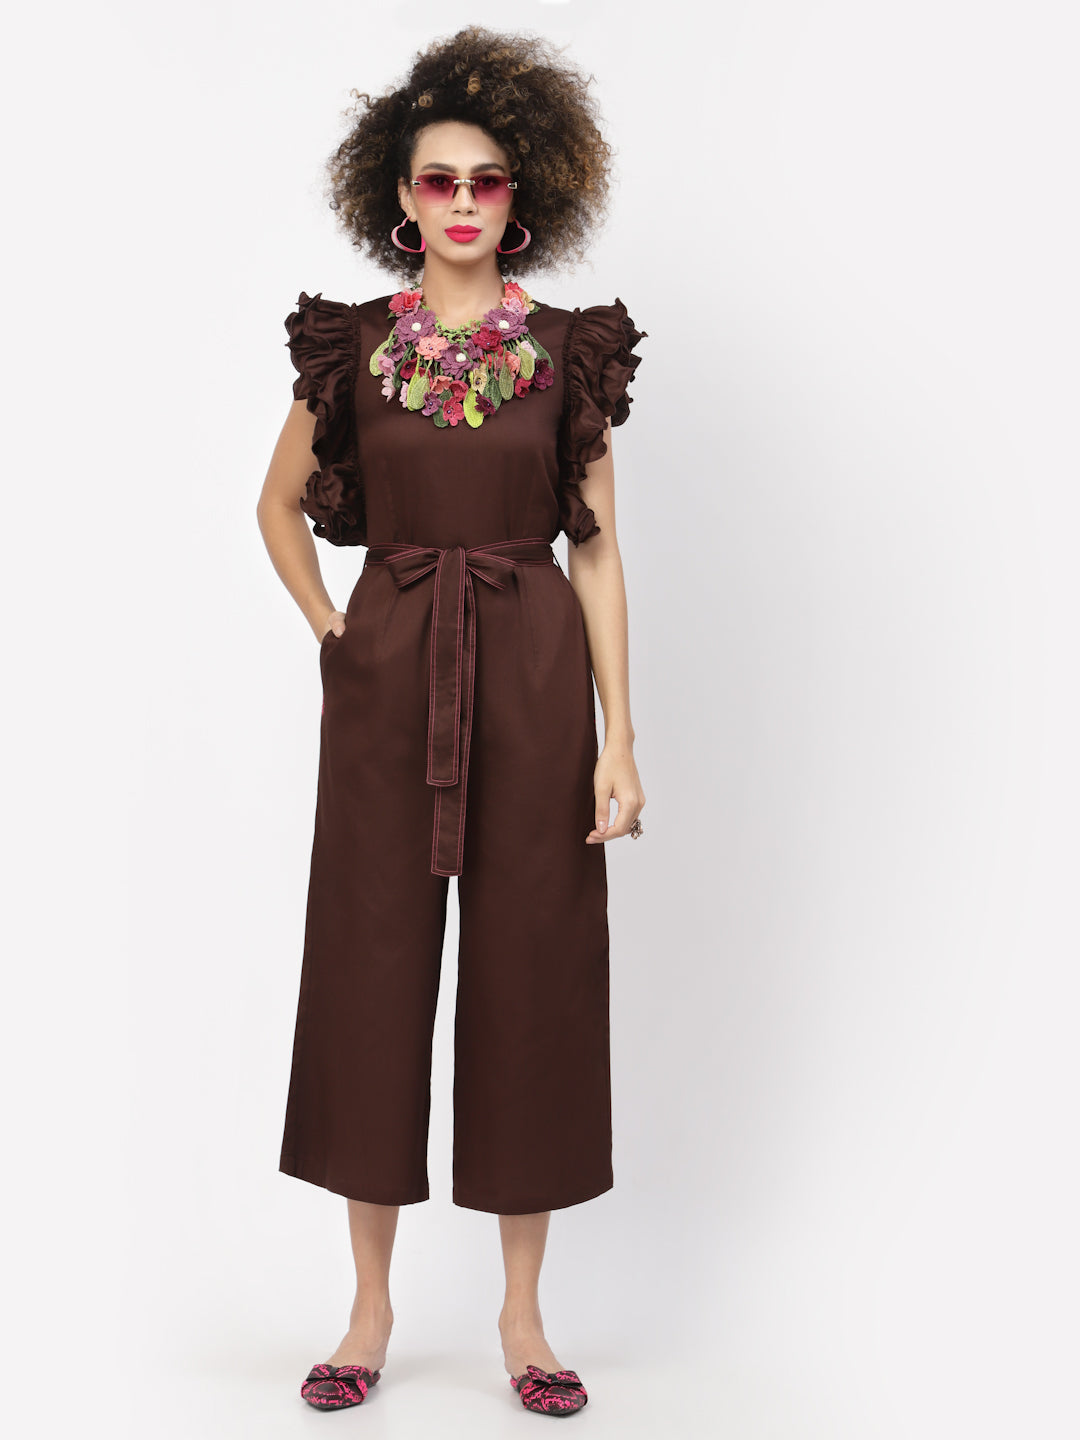 Chocolate Brown Jumpsuit With Side Frill